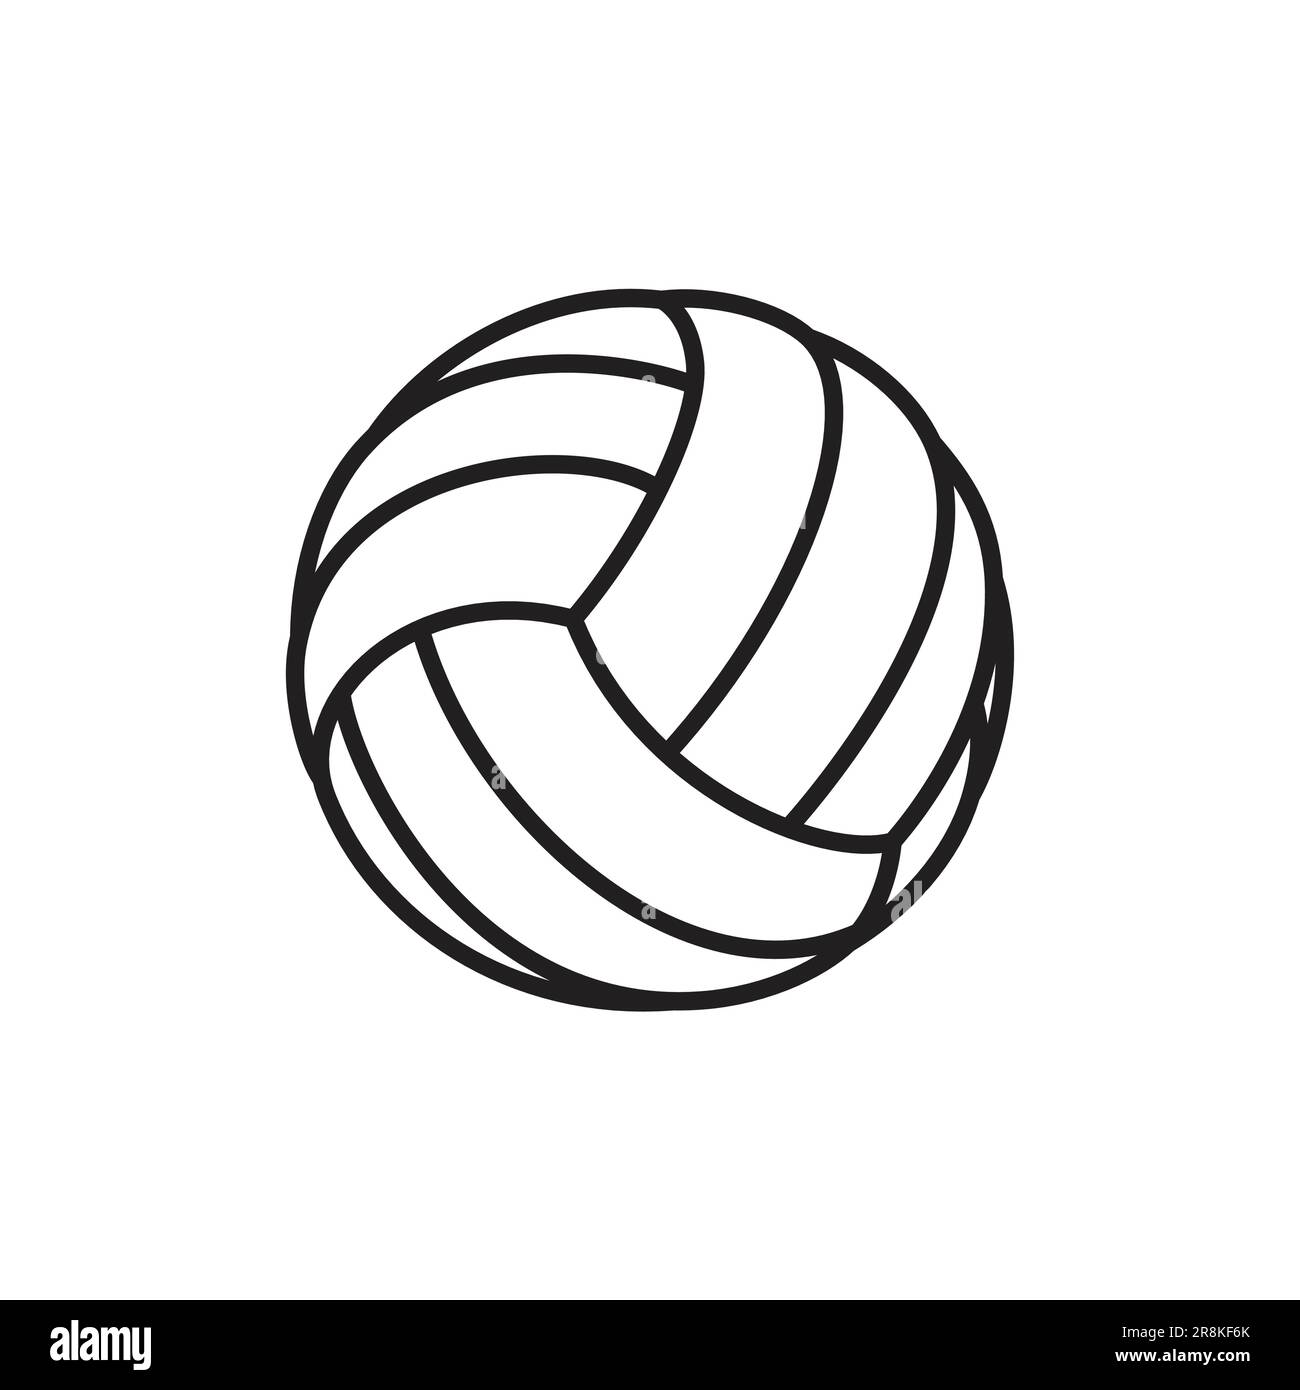 simple classic volleyball ball outline black line drawing lineart ...